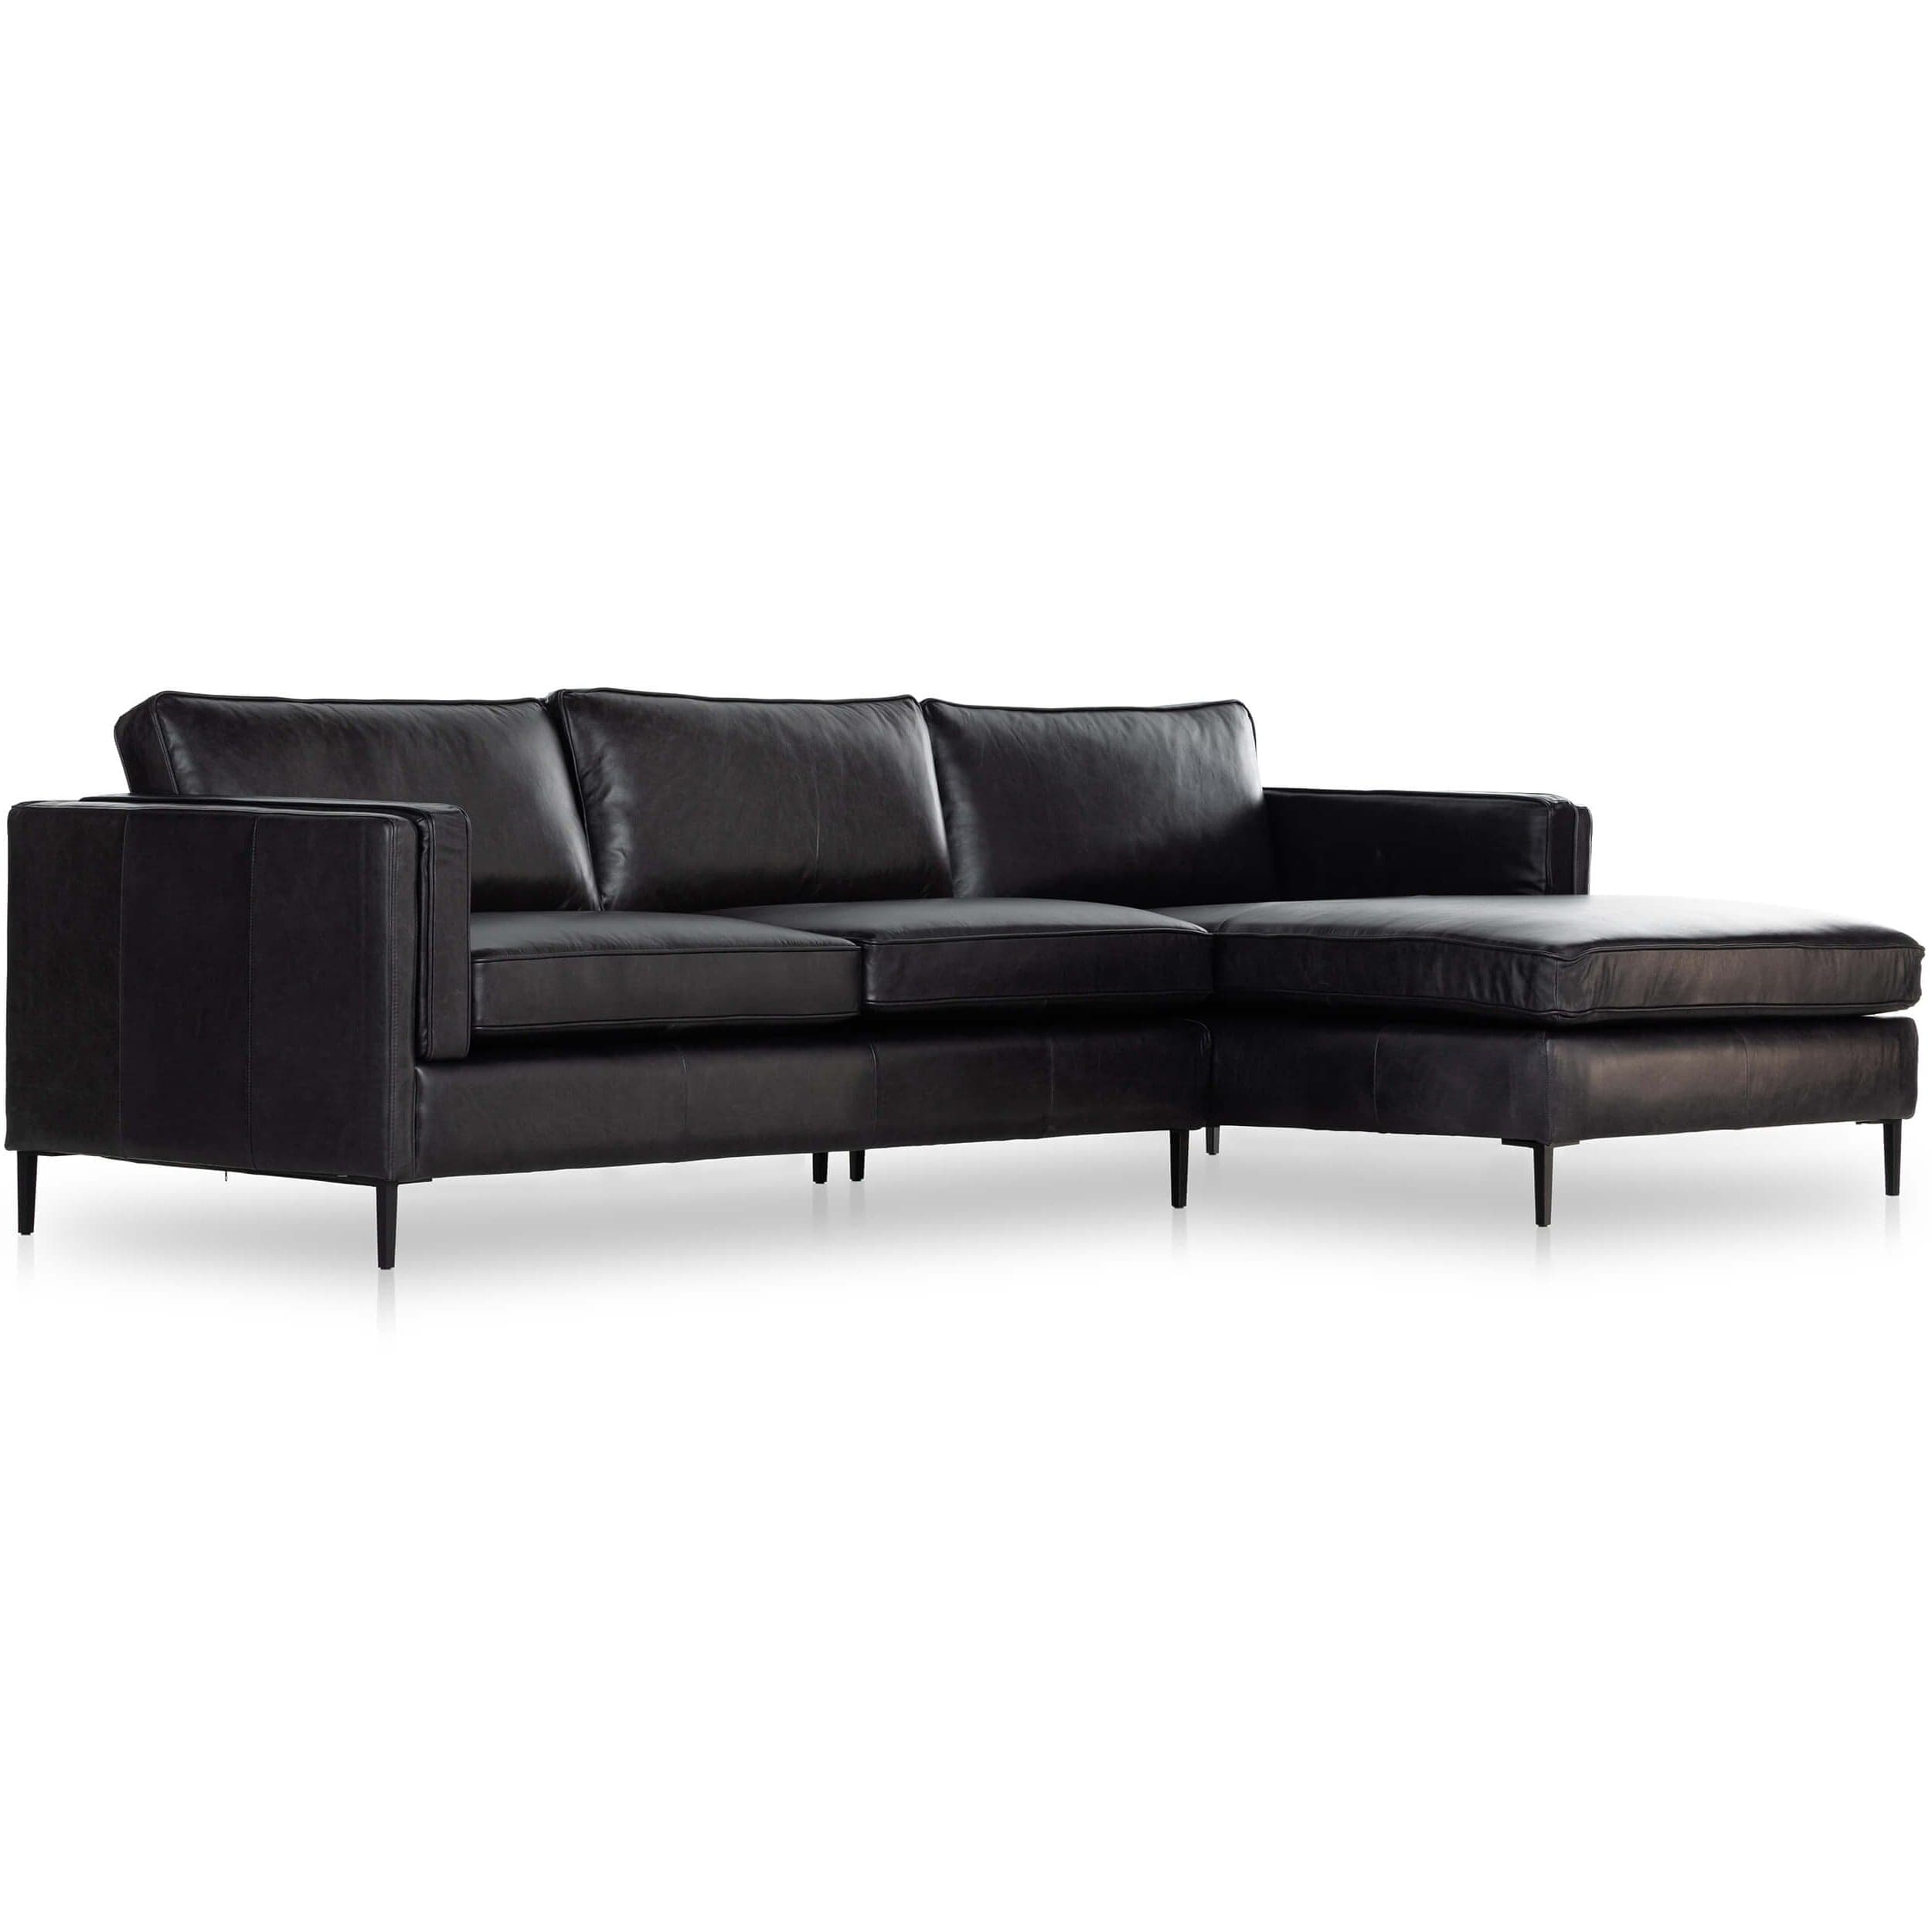 Image of Emery 2 Piece RAF Leather Sectional, Sonoma Black